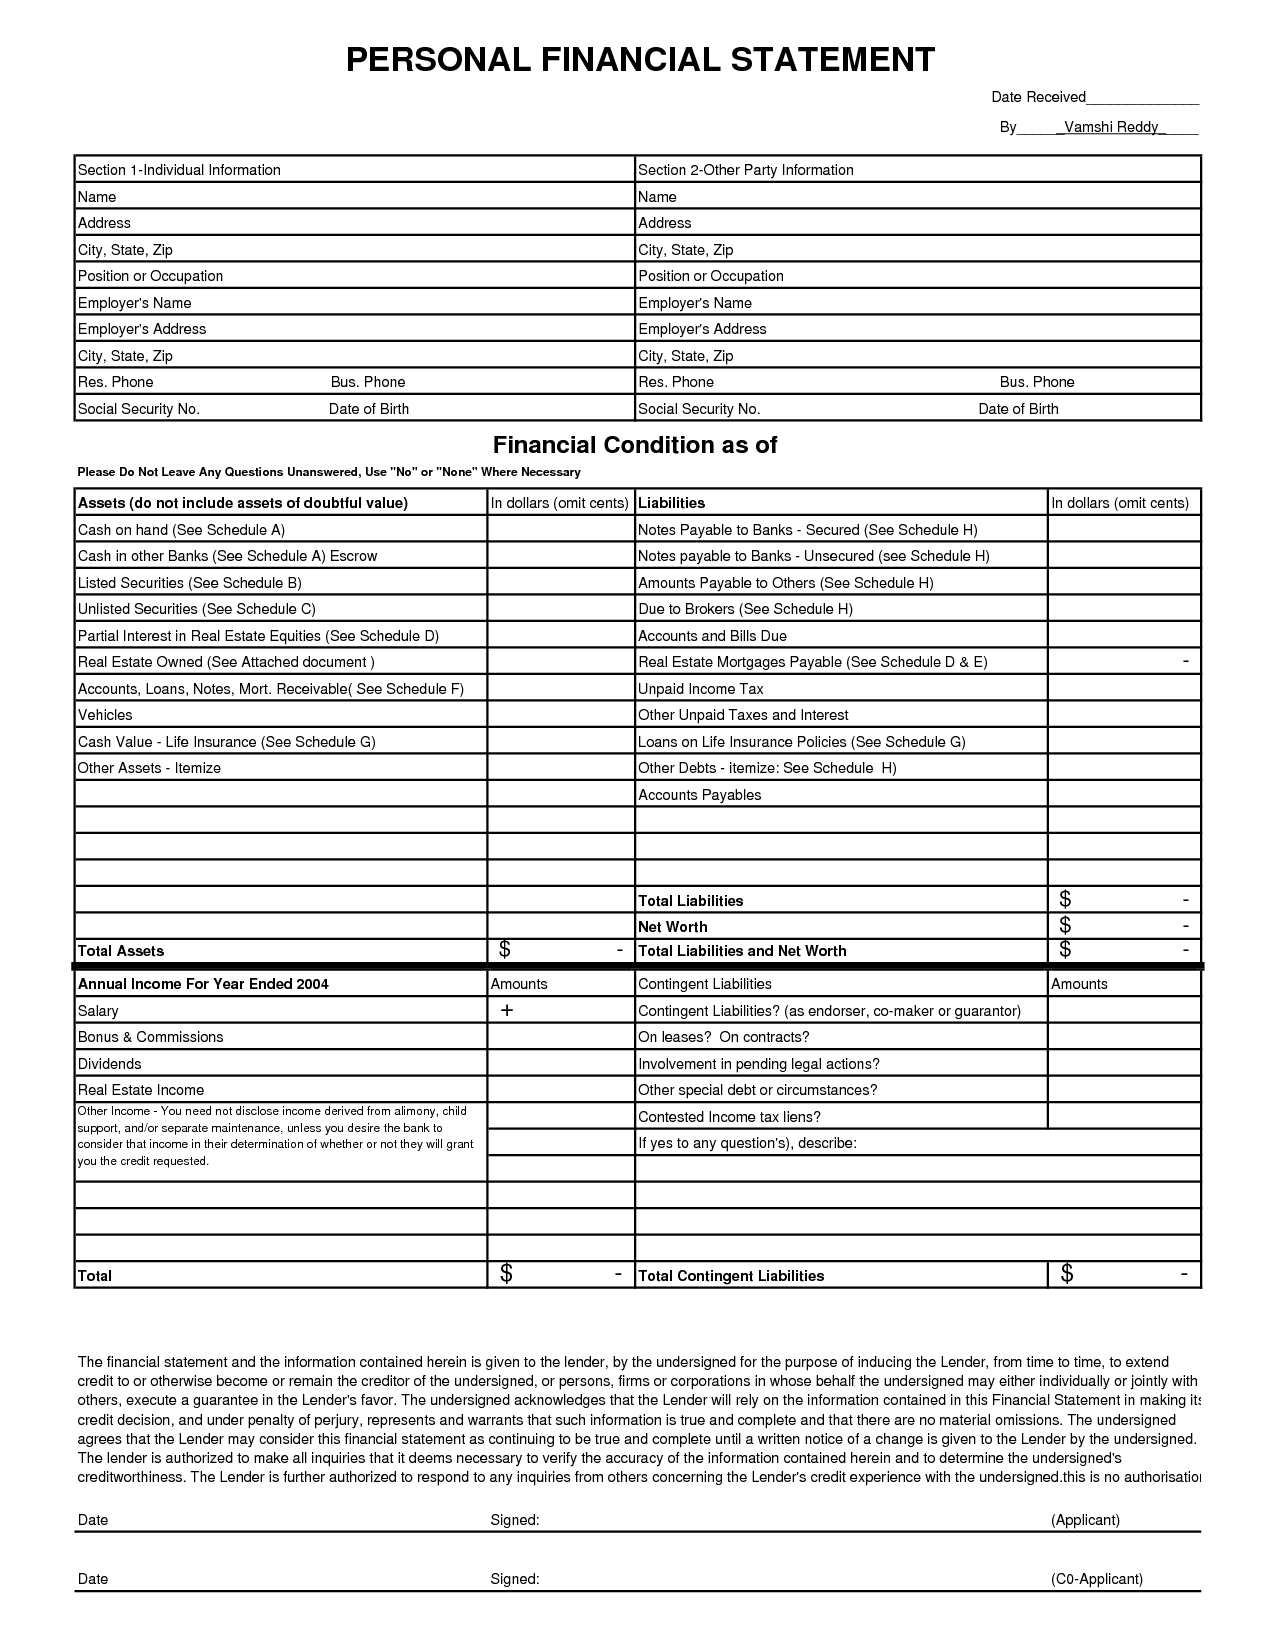 Template For Sba Personal Financial Statement Excel Template To Sba Personal Financial Statement Excel Template Document